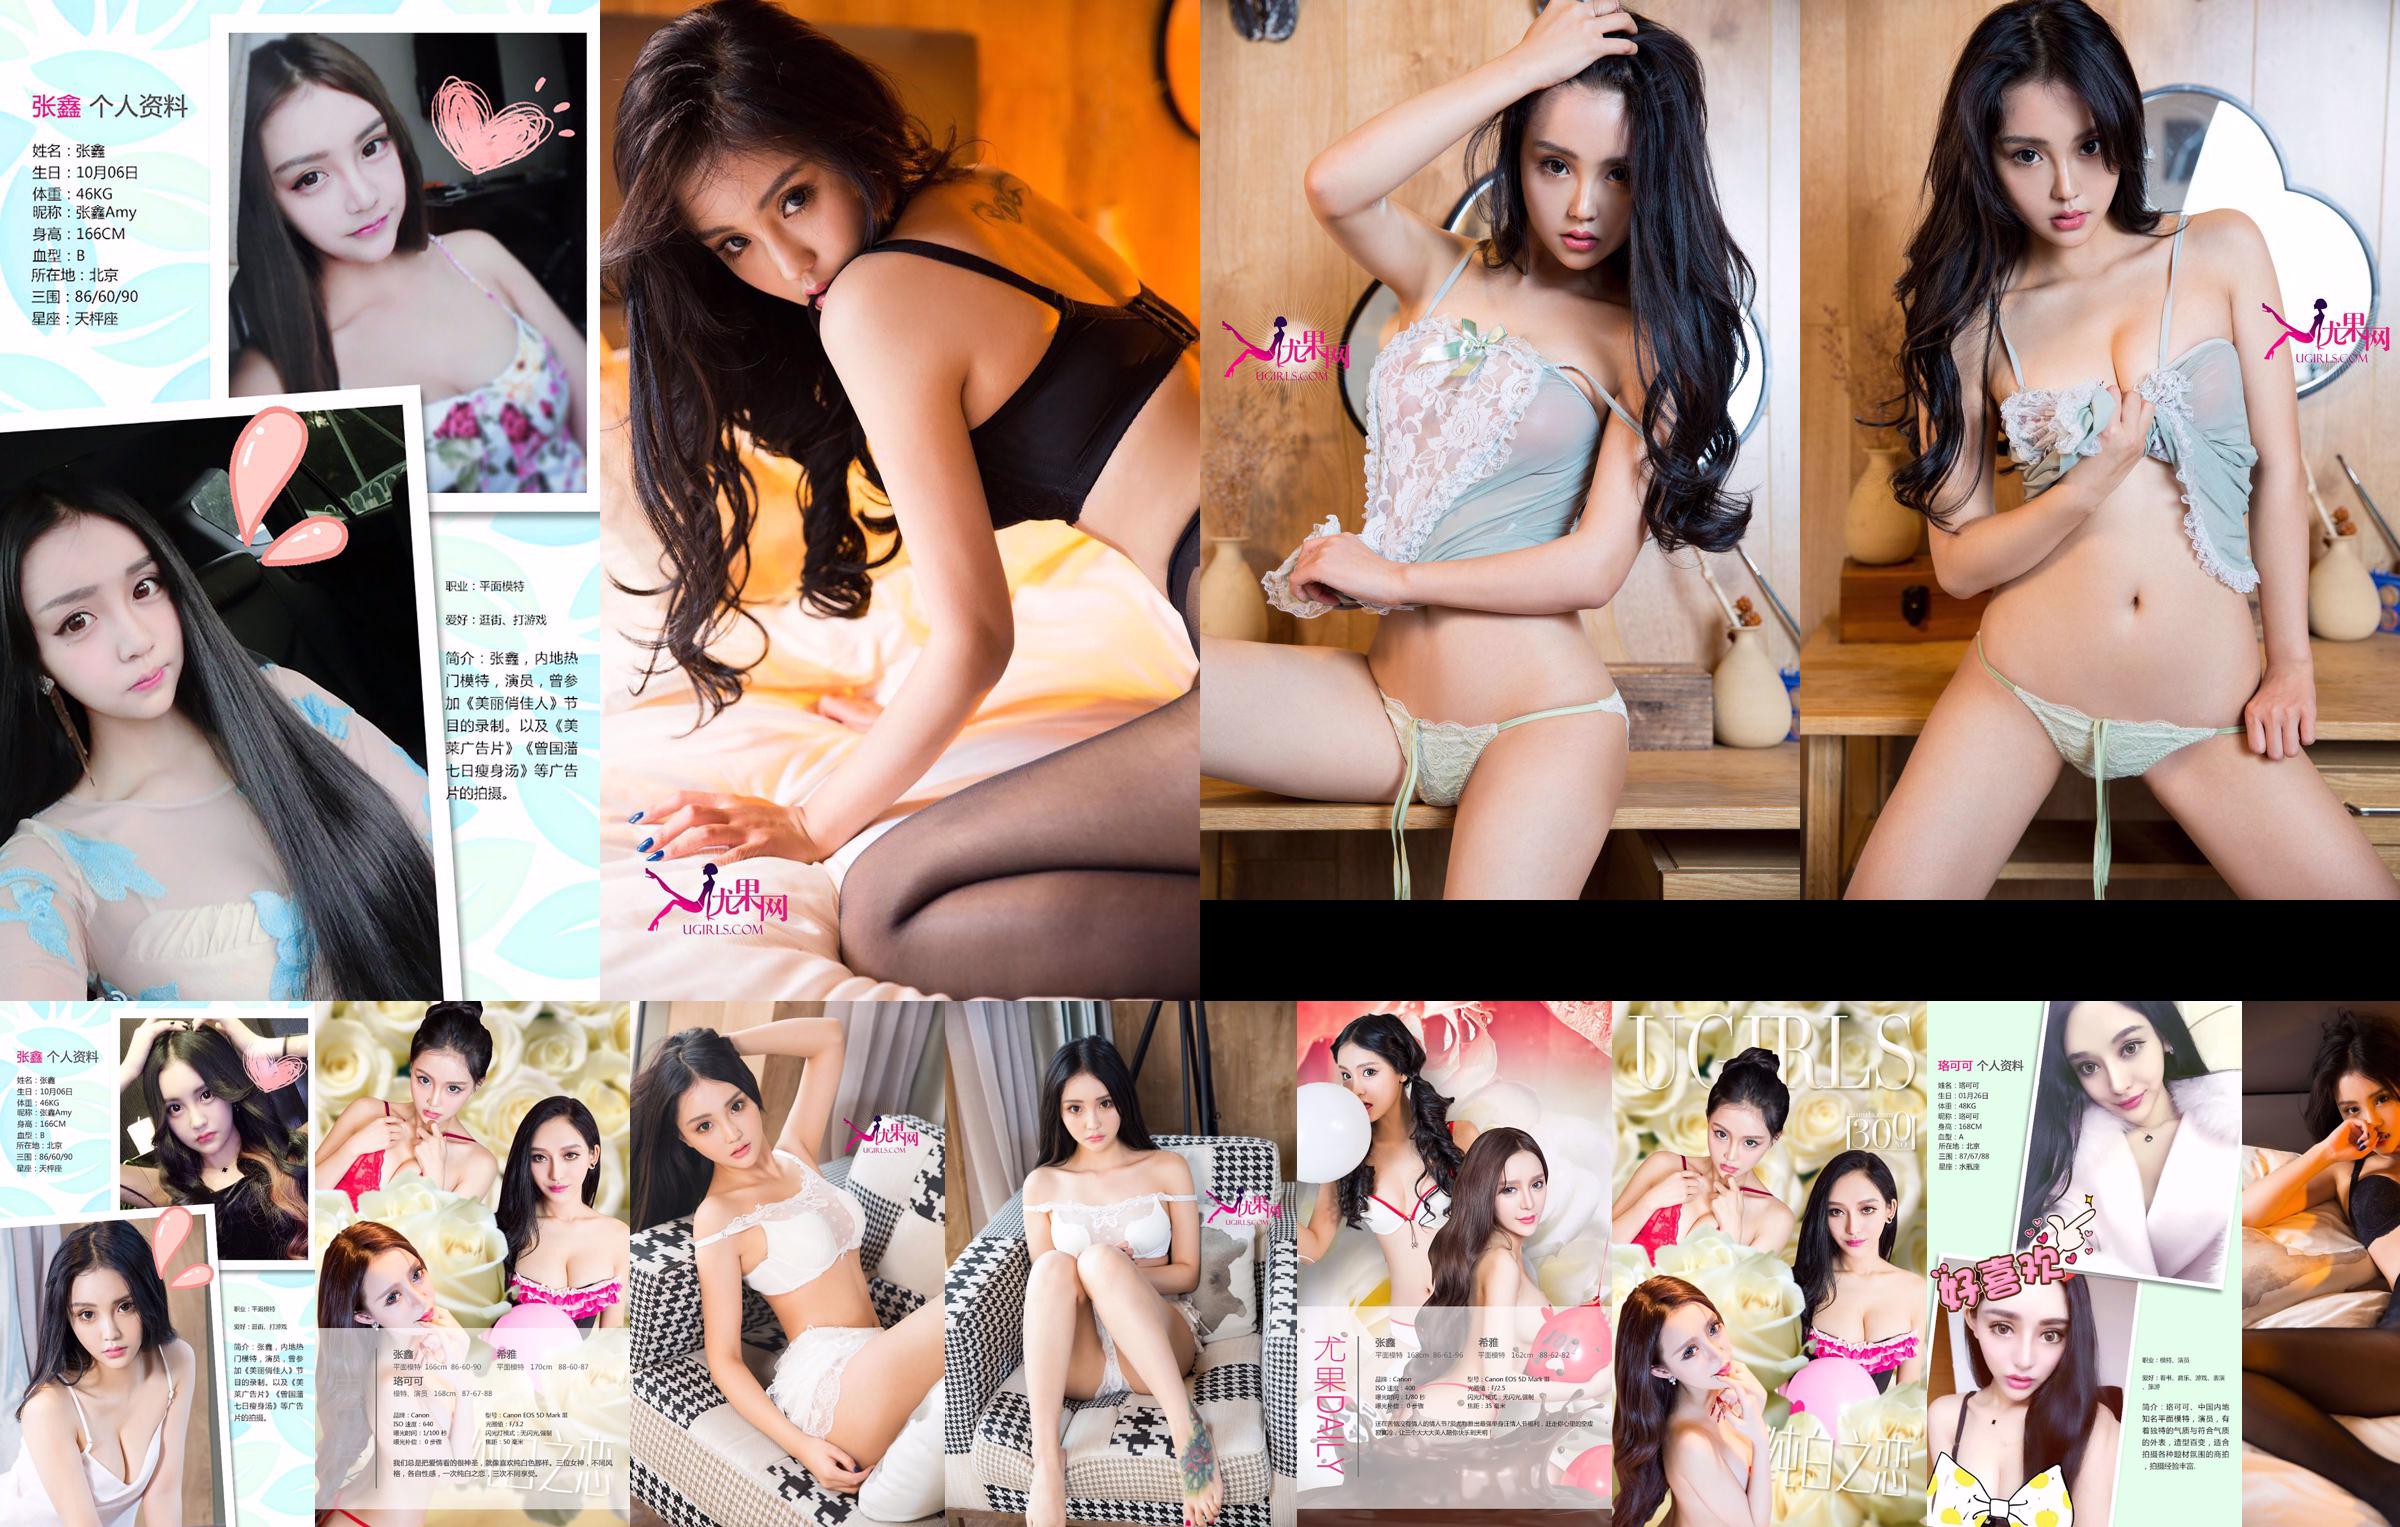 Zhang Xin "The First Experience of Love" [Ugirls] U147 No.d7c311 Page 1